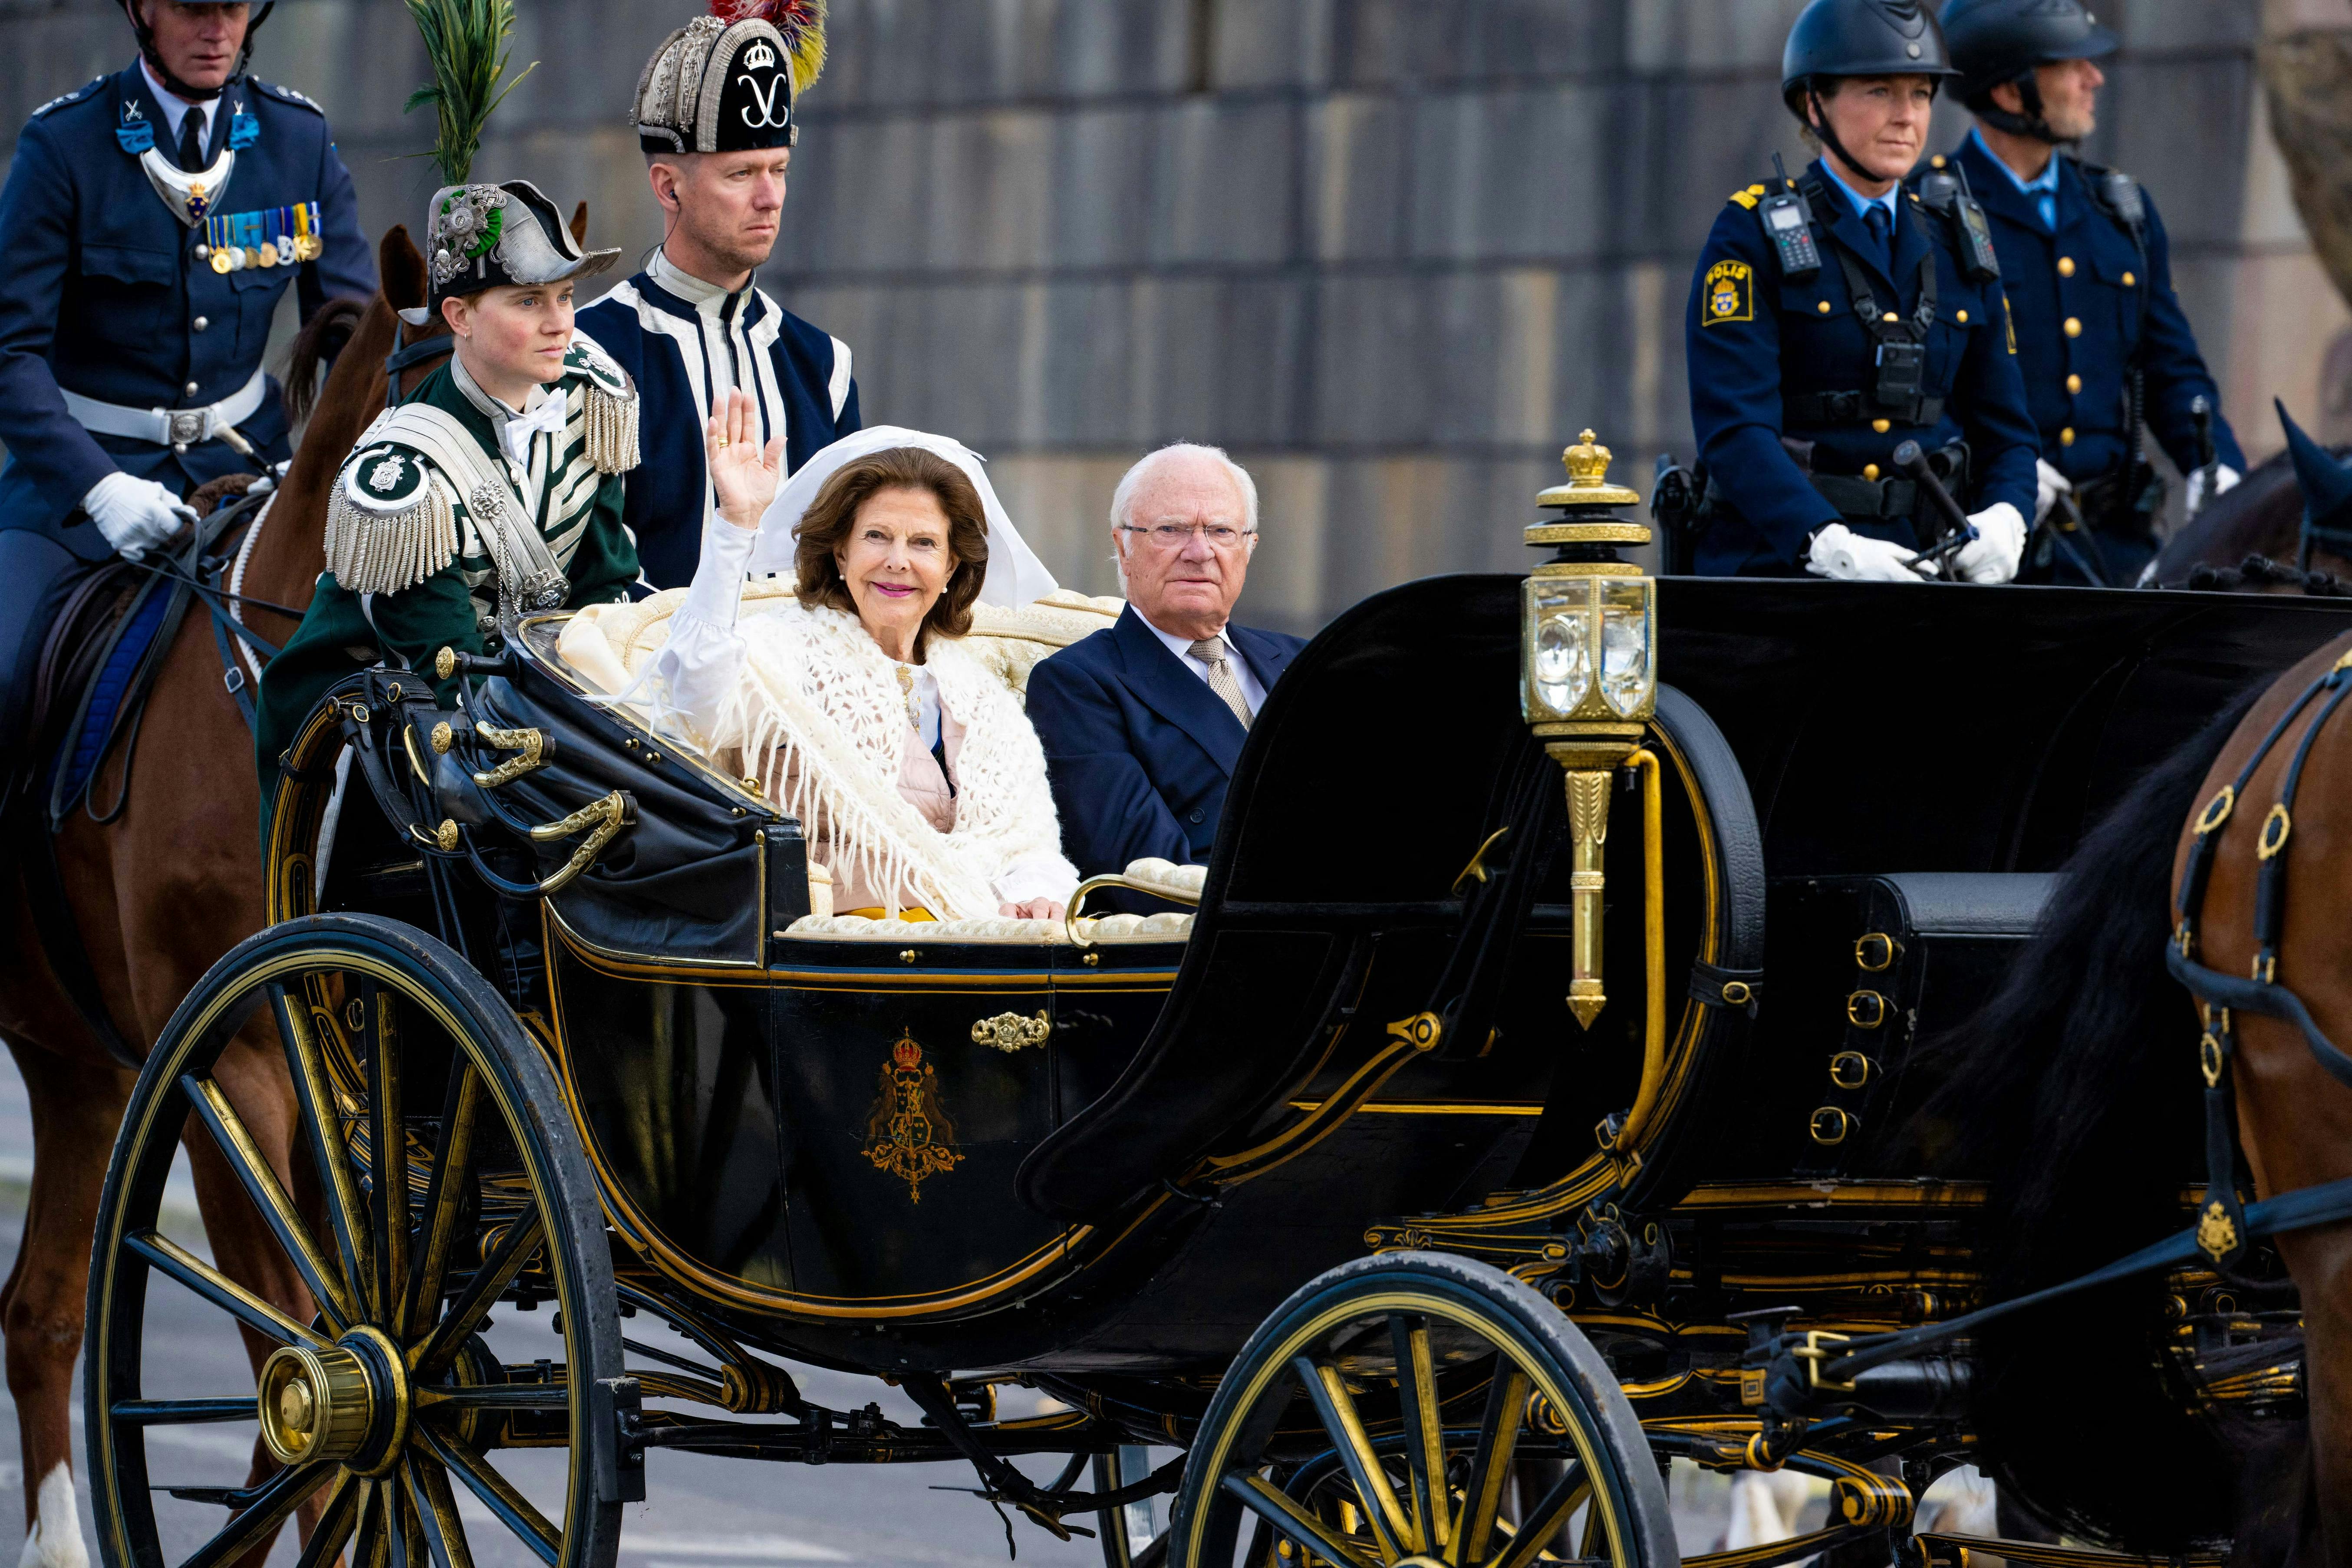 King Carl Gustaf, Queen Silvia during the celebrations of National Day Sweden 2024 in Stockholm, Sweden. 06 Jun 2024 Pictured: King Carl Gustaf, Queen Silvia during the celebrations of National Day Sweden 2024 in Stockholm, Sweden. Photo credit: MEGA TheMegaAgency.com +1 888 505 6342 (Mega Agency TagID: MEGA1149885_048.jpg) [Photo via Mega Agency]